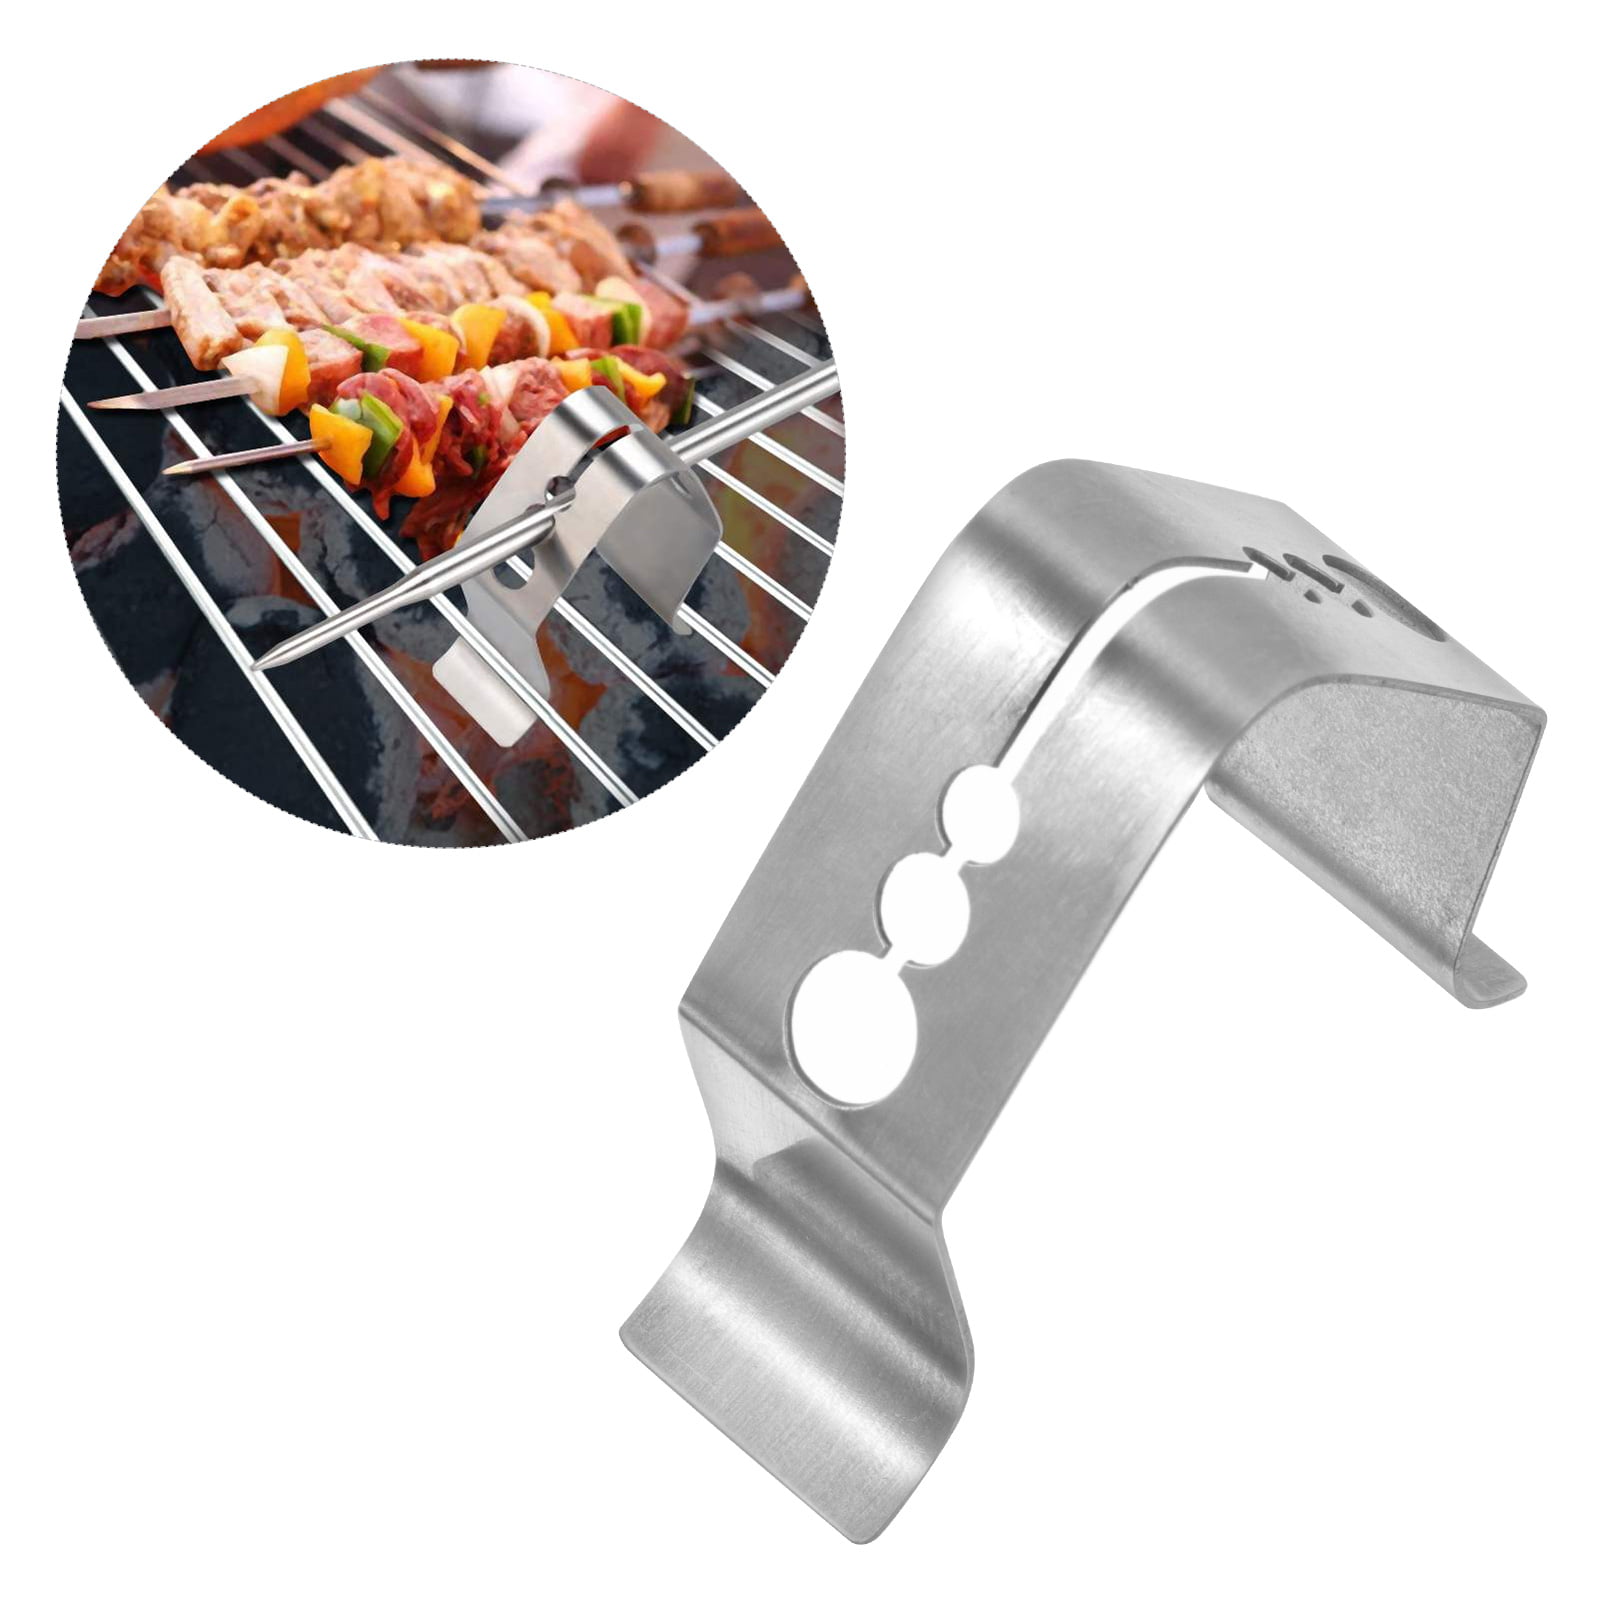 Buy Veken 4 Pack Grill Meat Thermometer Probe Clip Holder